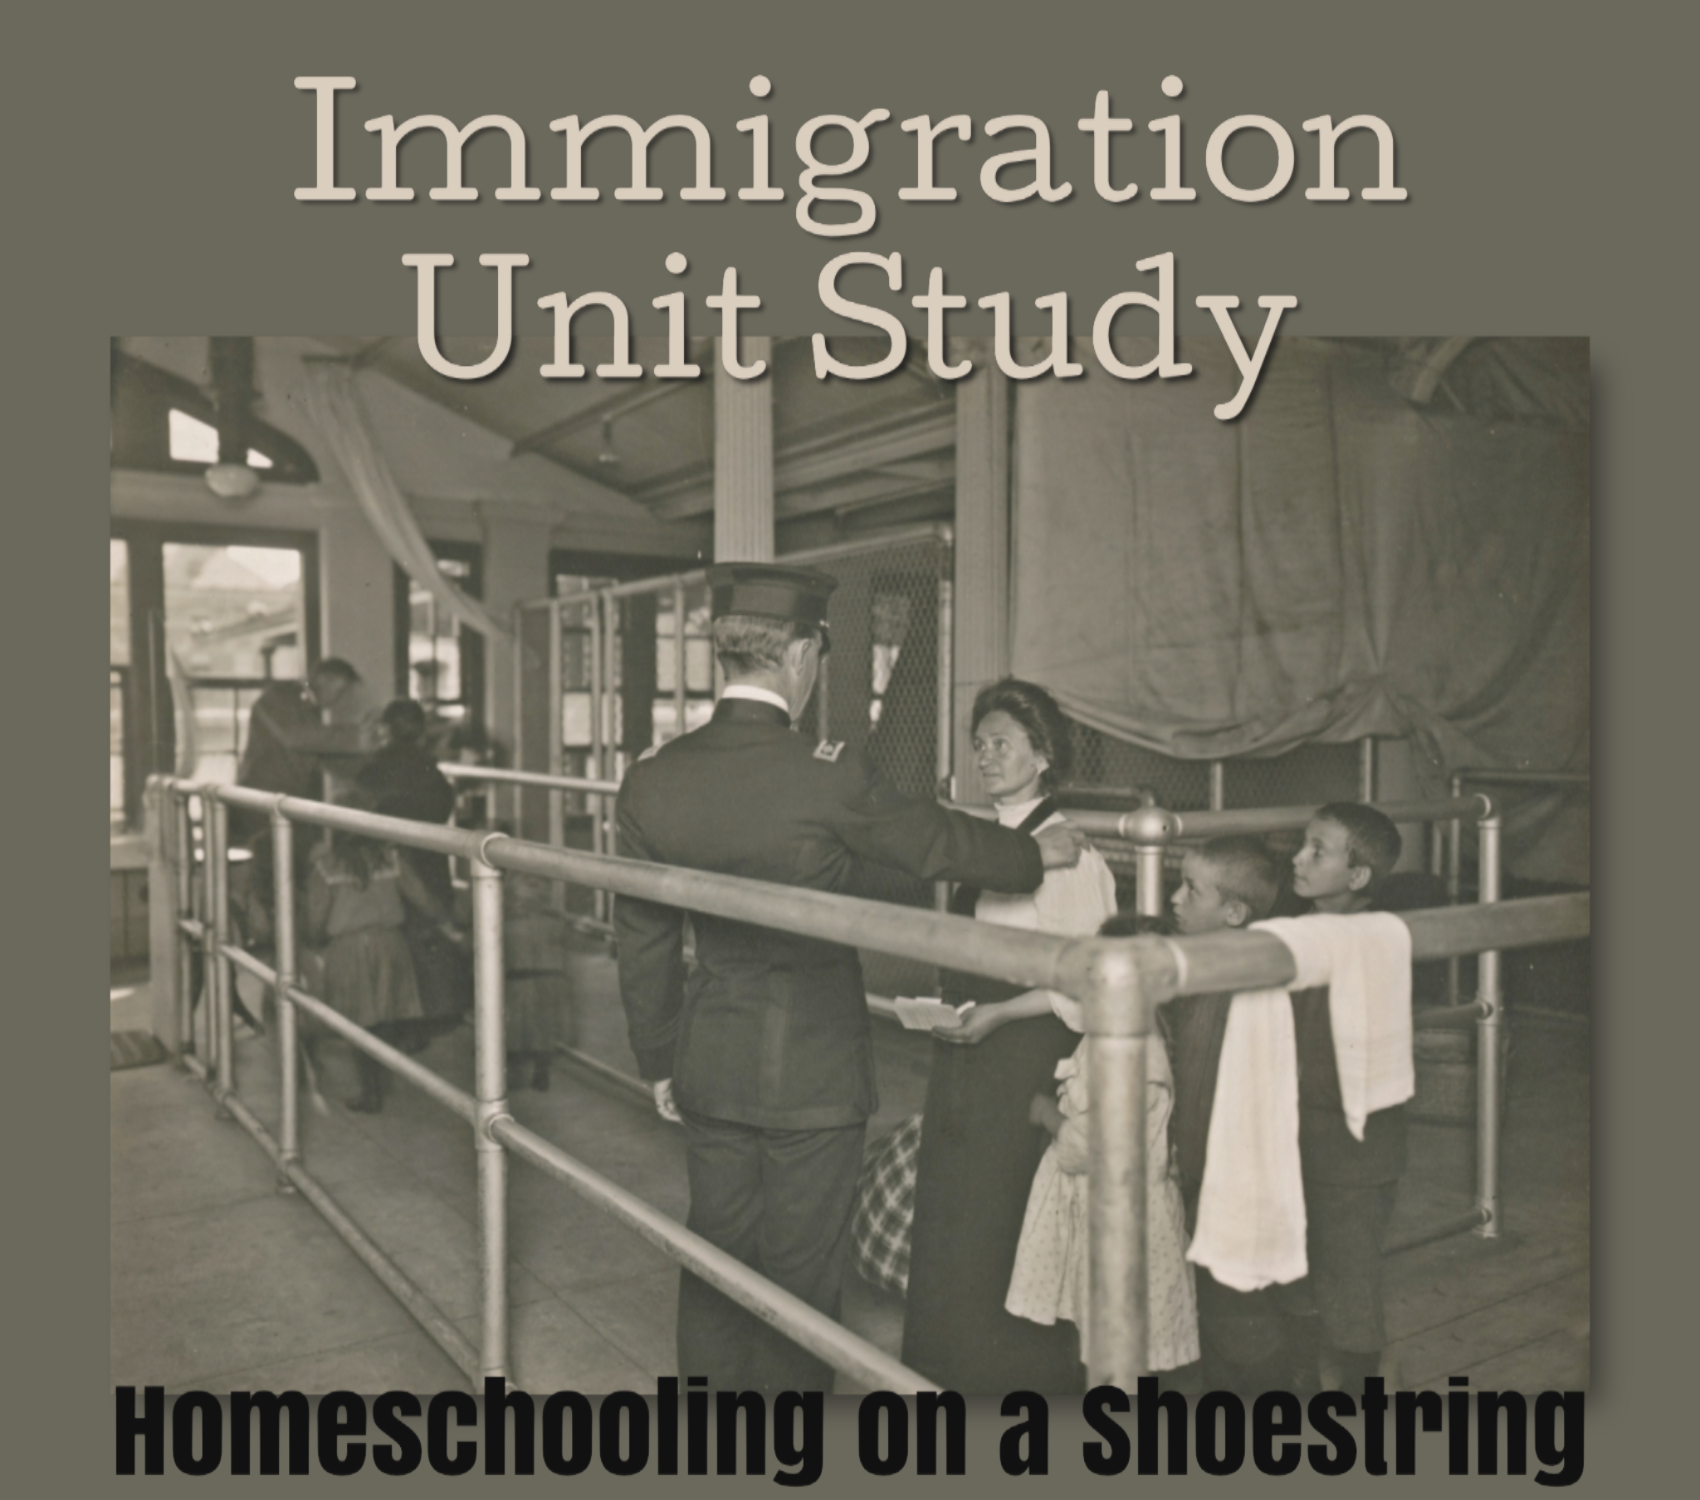 Immigration Unit Study Homeschooling on a Shoestring